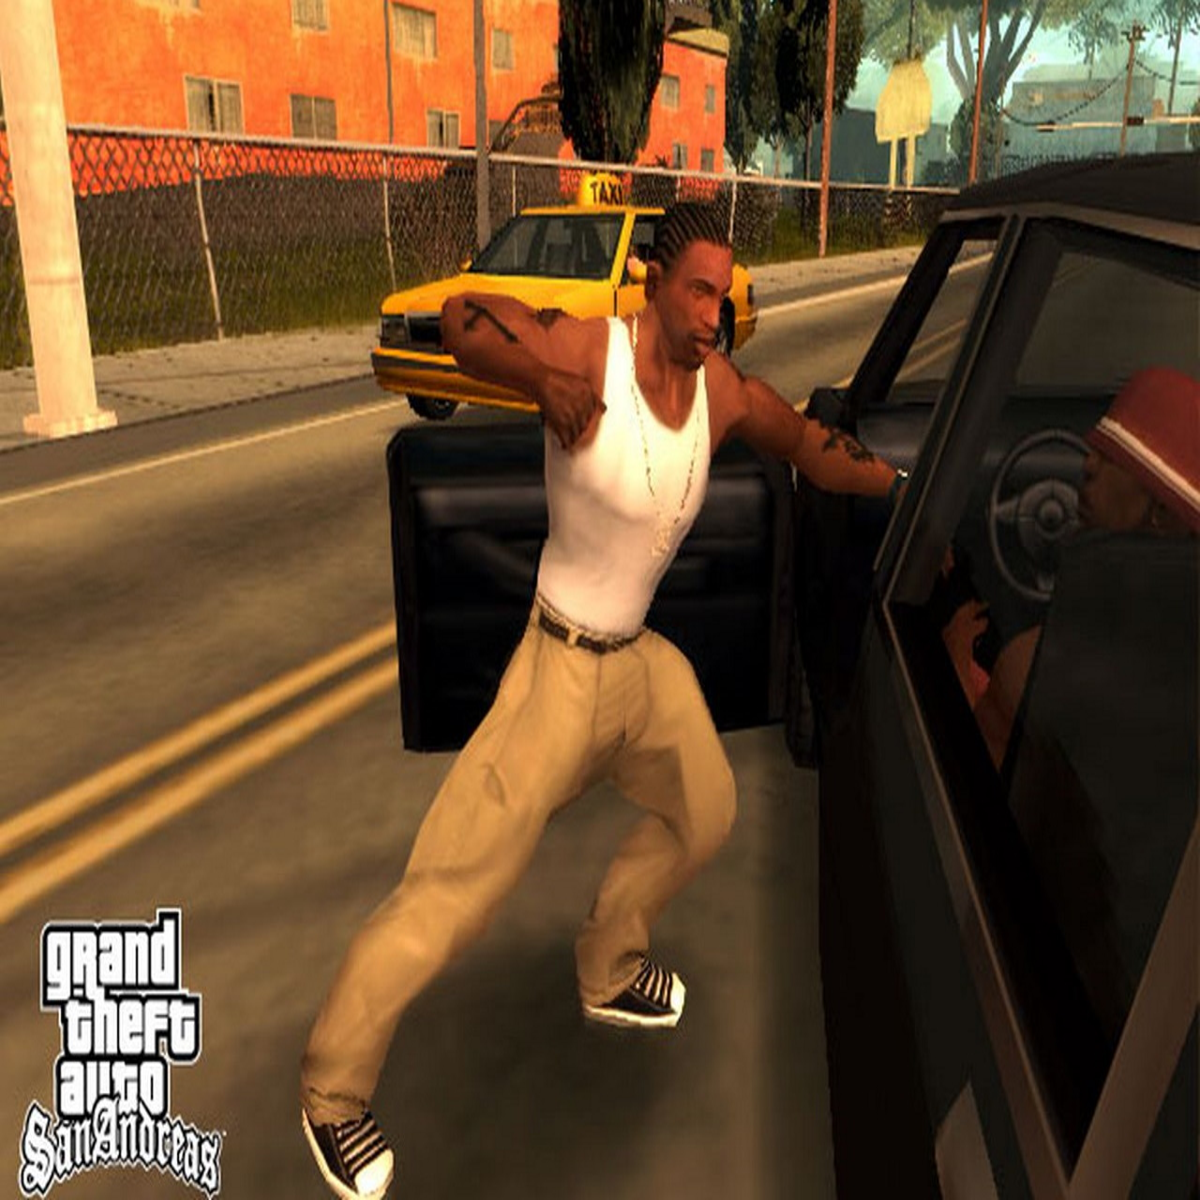 The best weapons in GTA San Andreas - Handguns, rocket launchers, and more